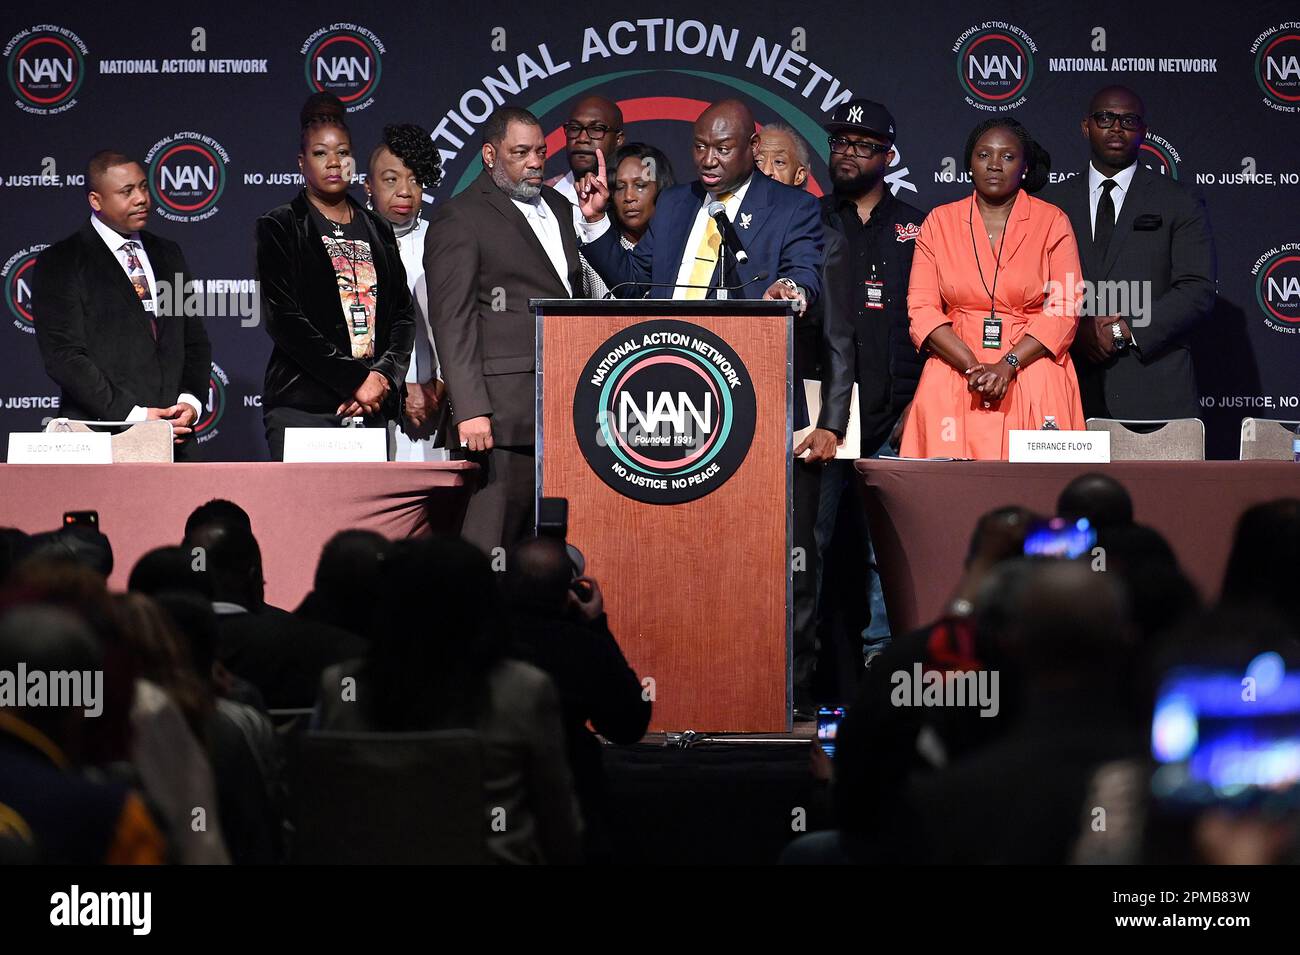 New York, USA. 12th Apr, 2023. (L-R) Andre Locke Sr., father of Amir Locke, Sybrina Fulton, mother of Trayvon Martin, Gwen Carr, mother of Eric Garner, Rodney Wells, step-father of Tyre Nichols, Philonise Floyd, brother of George Floyd, RowVaughn Wells, mother of Tyre Nichols, Attorney Benjamin Crump, Rev. Al Sharpton, Terrence Floyd, brother of George Floyd, Wanda Cooper Jones, mother of Ahmaud Arbery and guest attend the National Action Network (NAN) conference at the Sheraton Hotel, New York, NY, April 12, 2023. (Photo by Anthony Behar/Sipa USA) Credit: Sipa USA/Alamy Live News Stock Photo